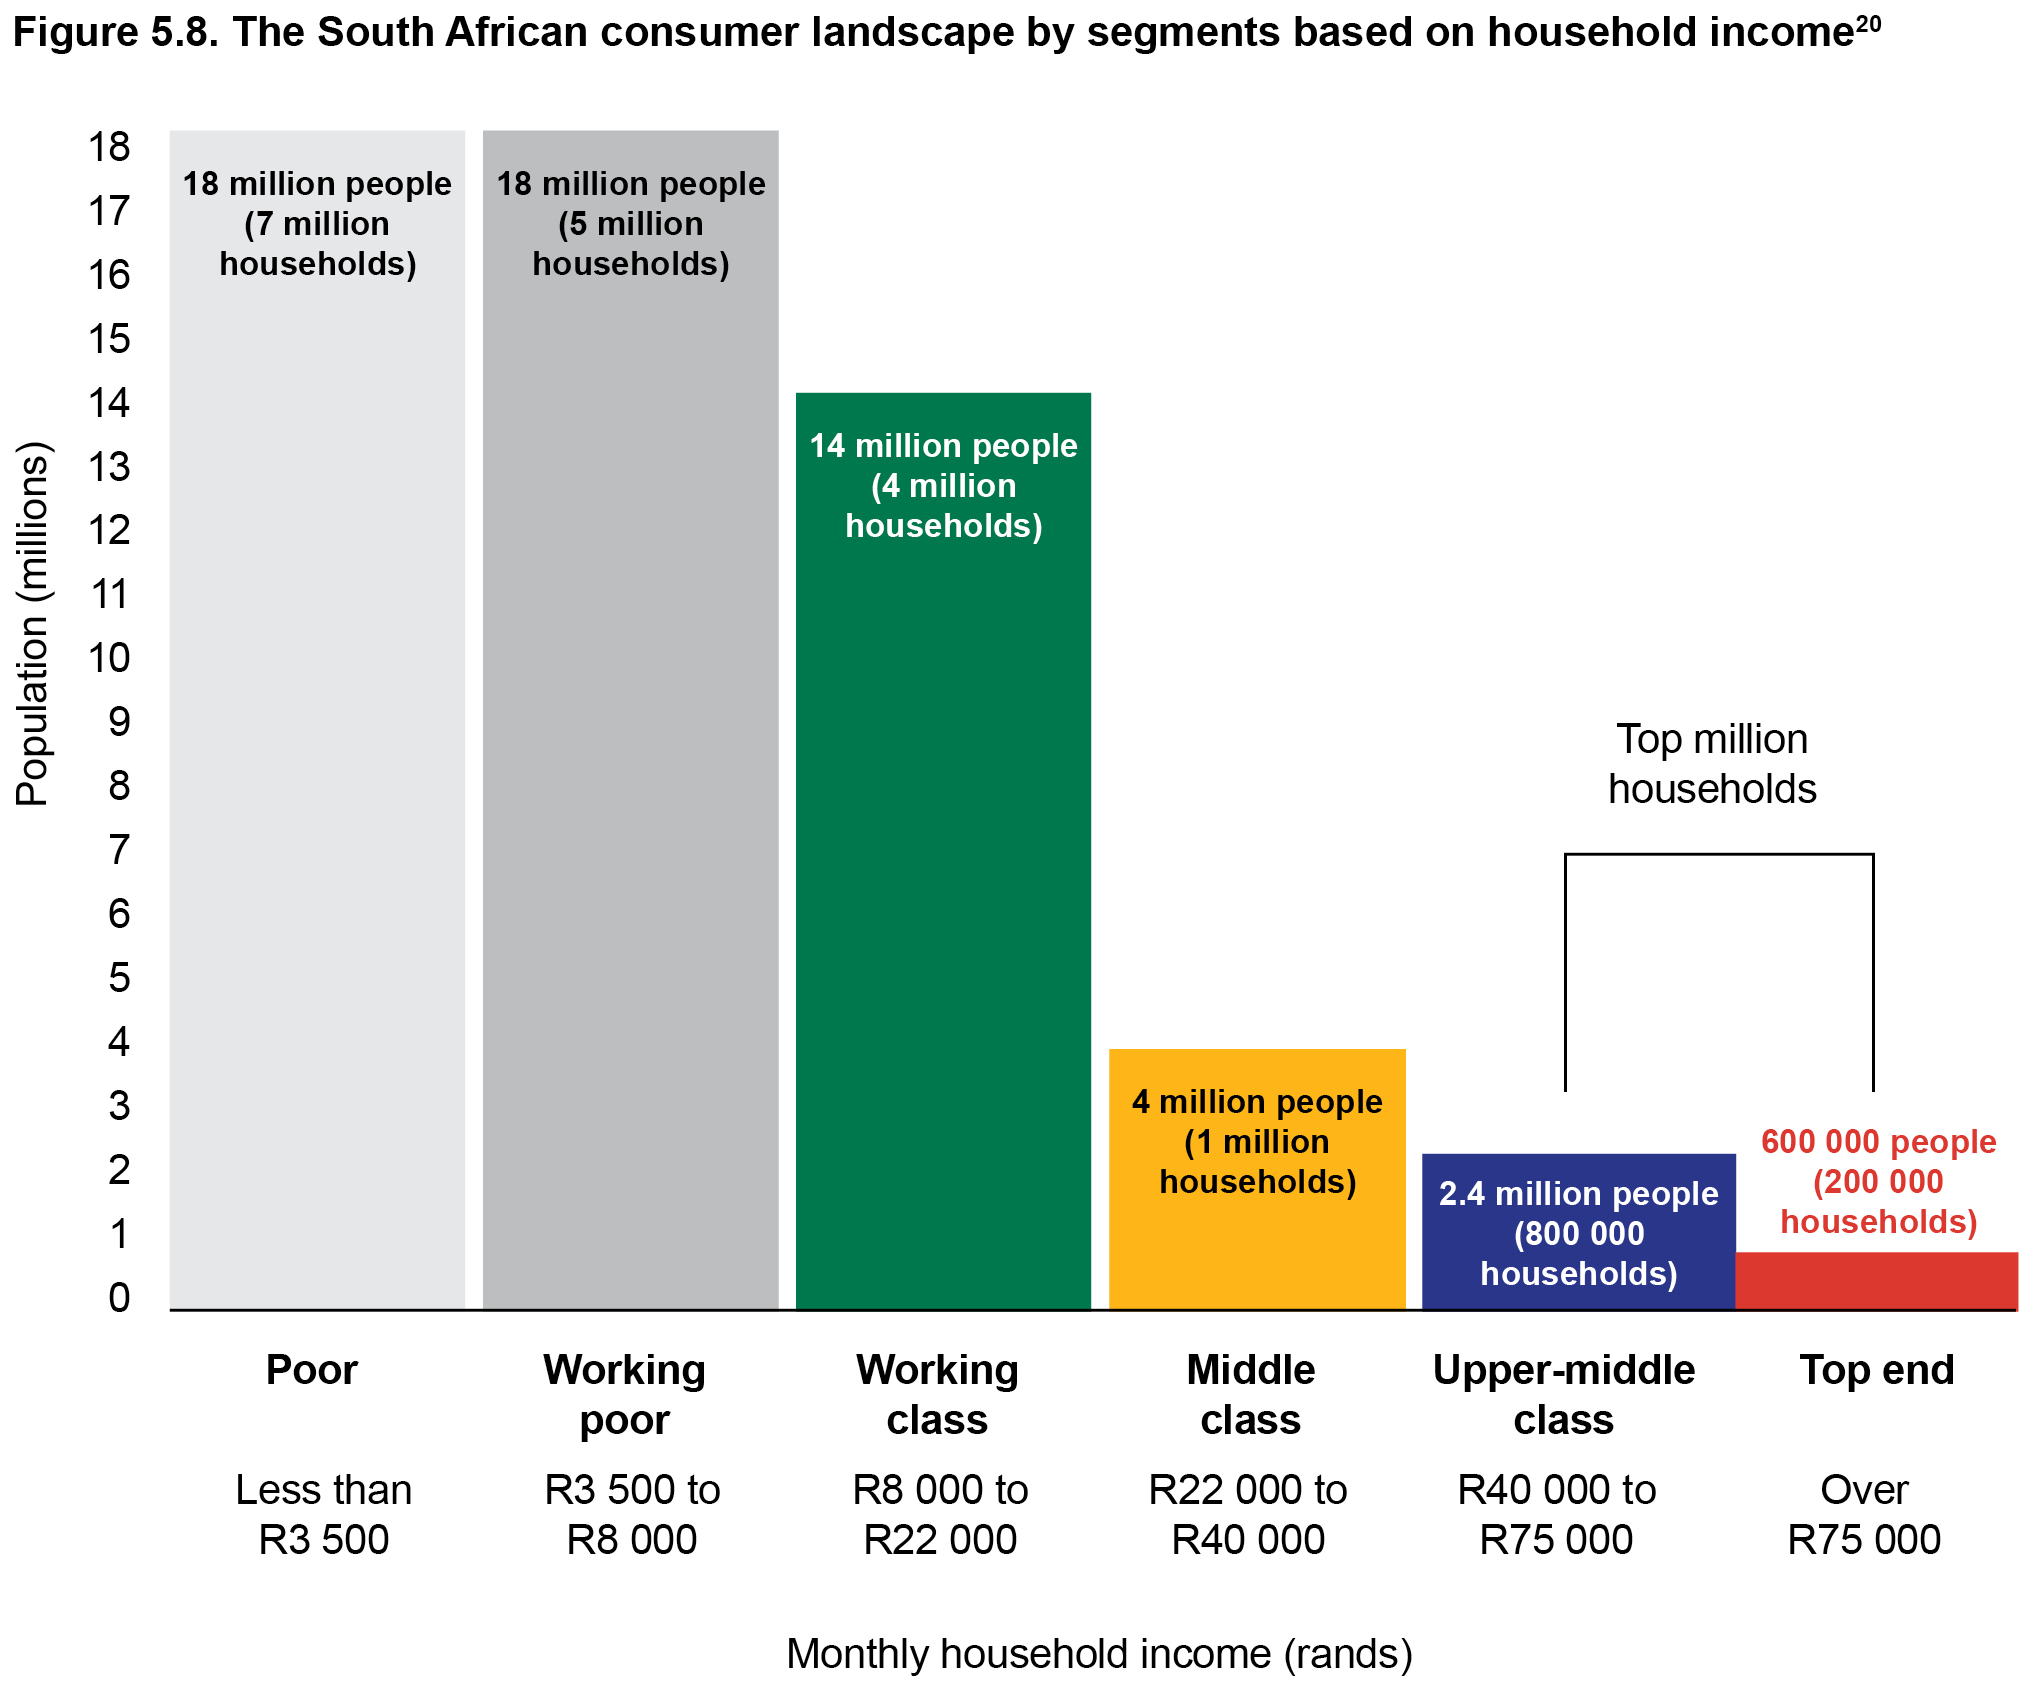 Figure 5.8: The South African consumer landscape by segments based on household income